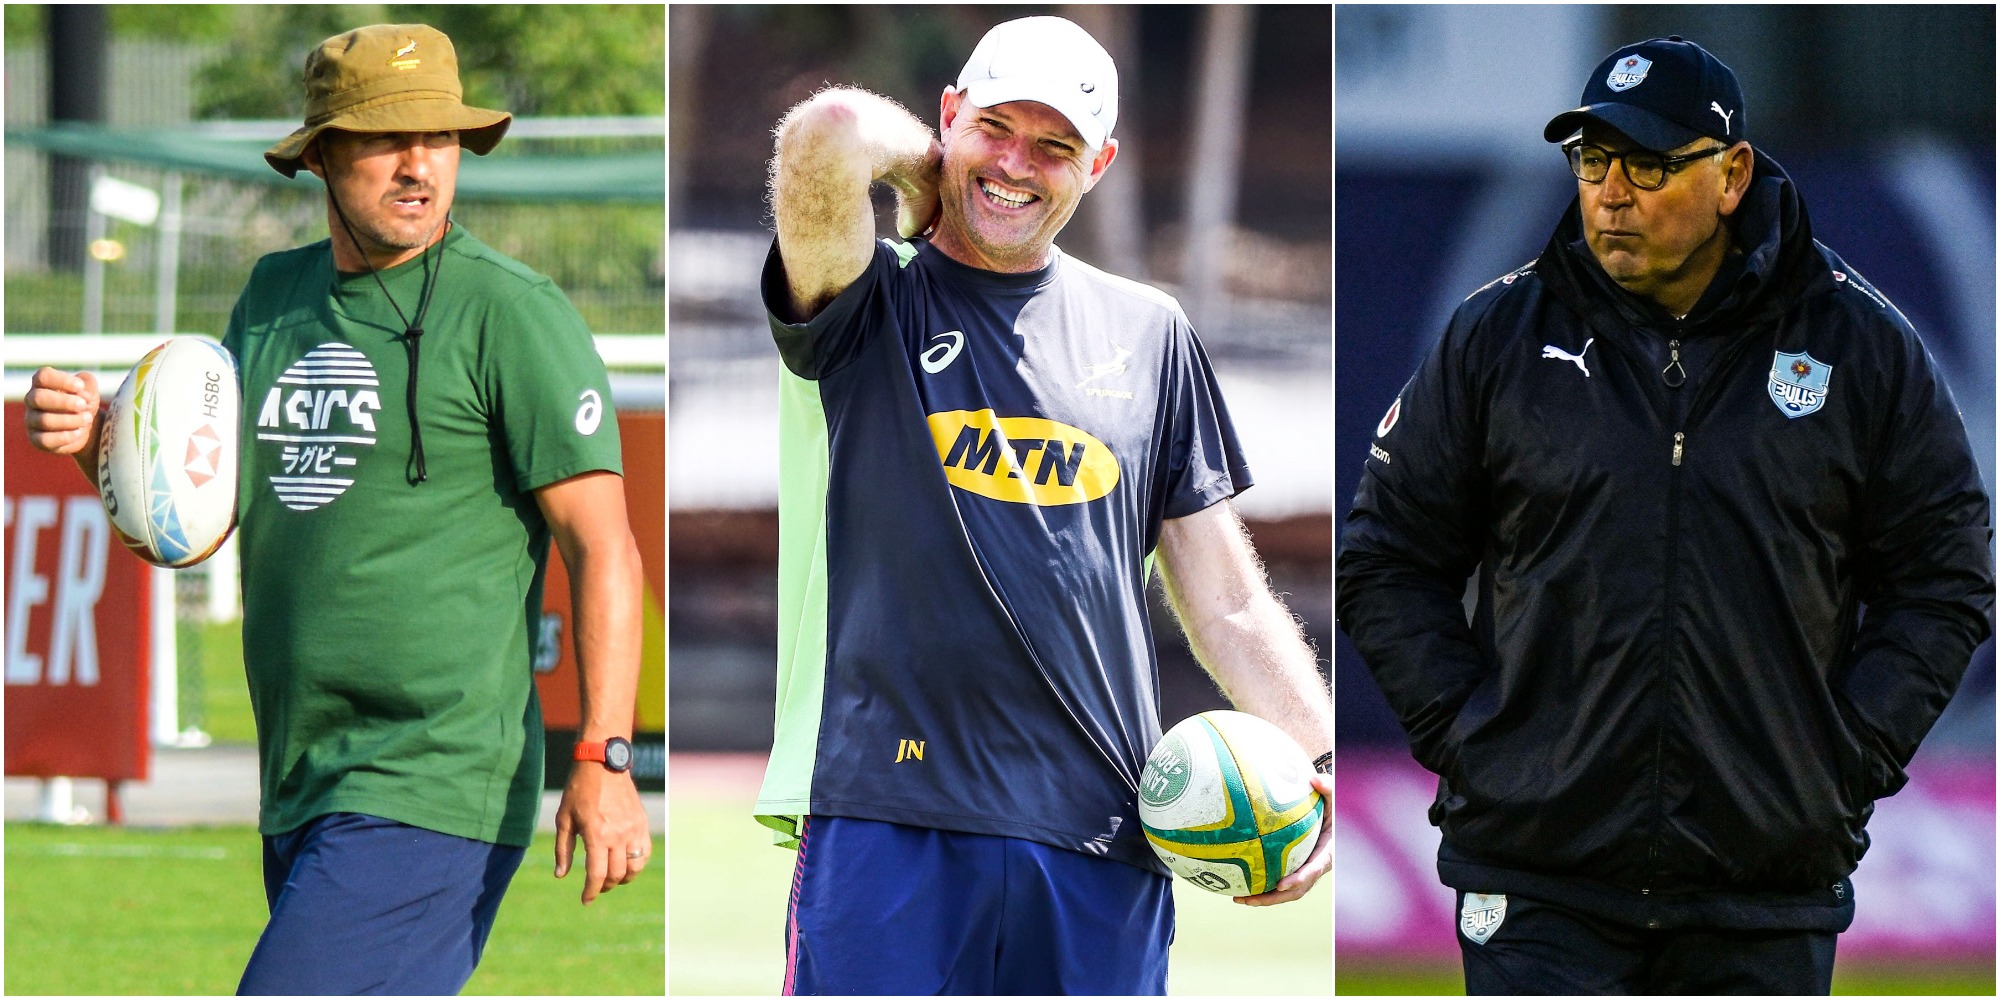 Coach and Team of the Year nominees (left to right): Powell / Blitzboks, Nienaber / Springboks and White / Vodacom Bulls.